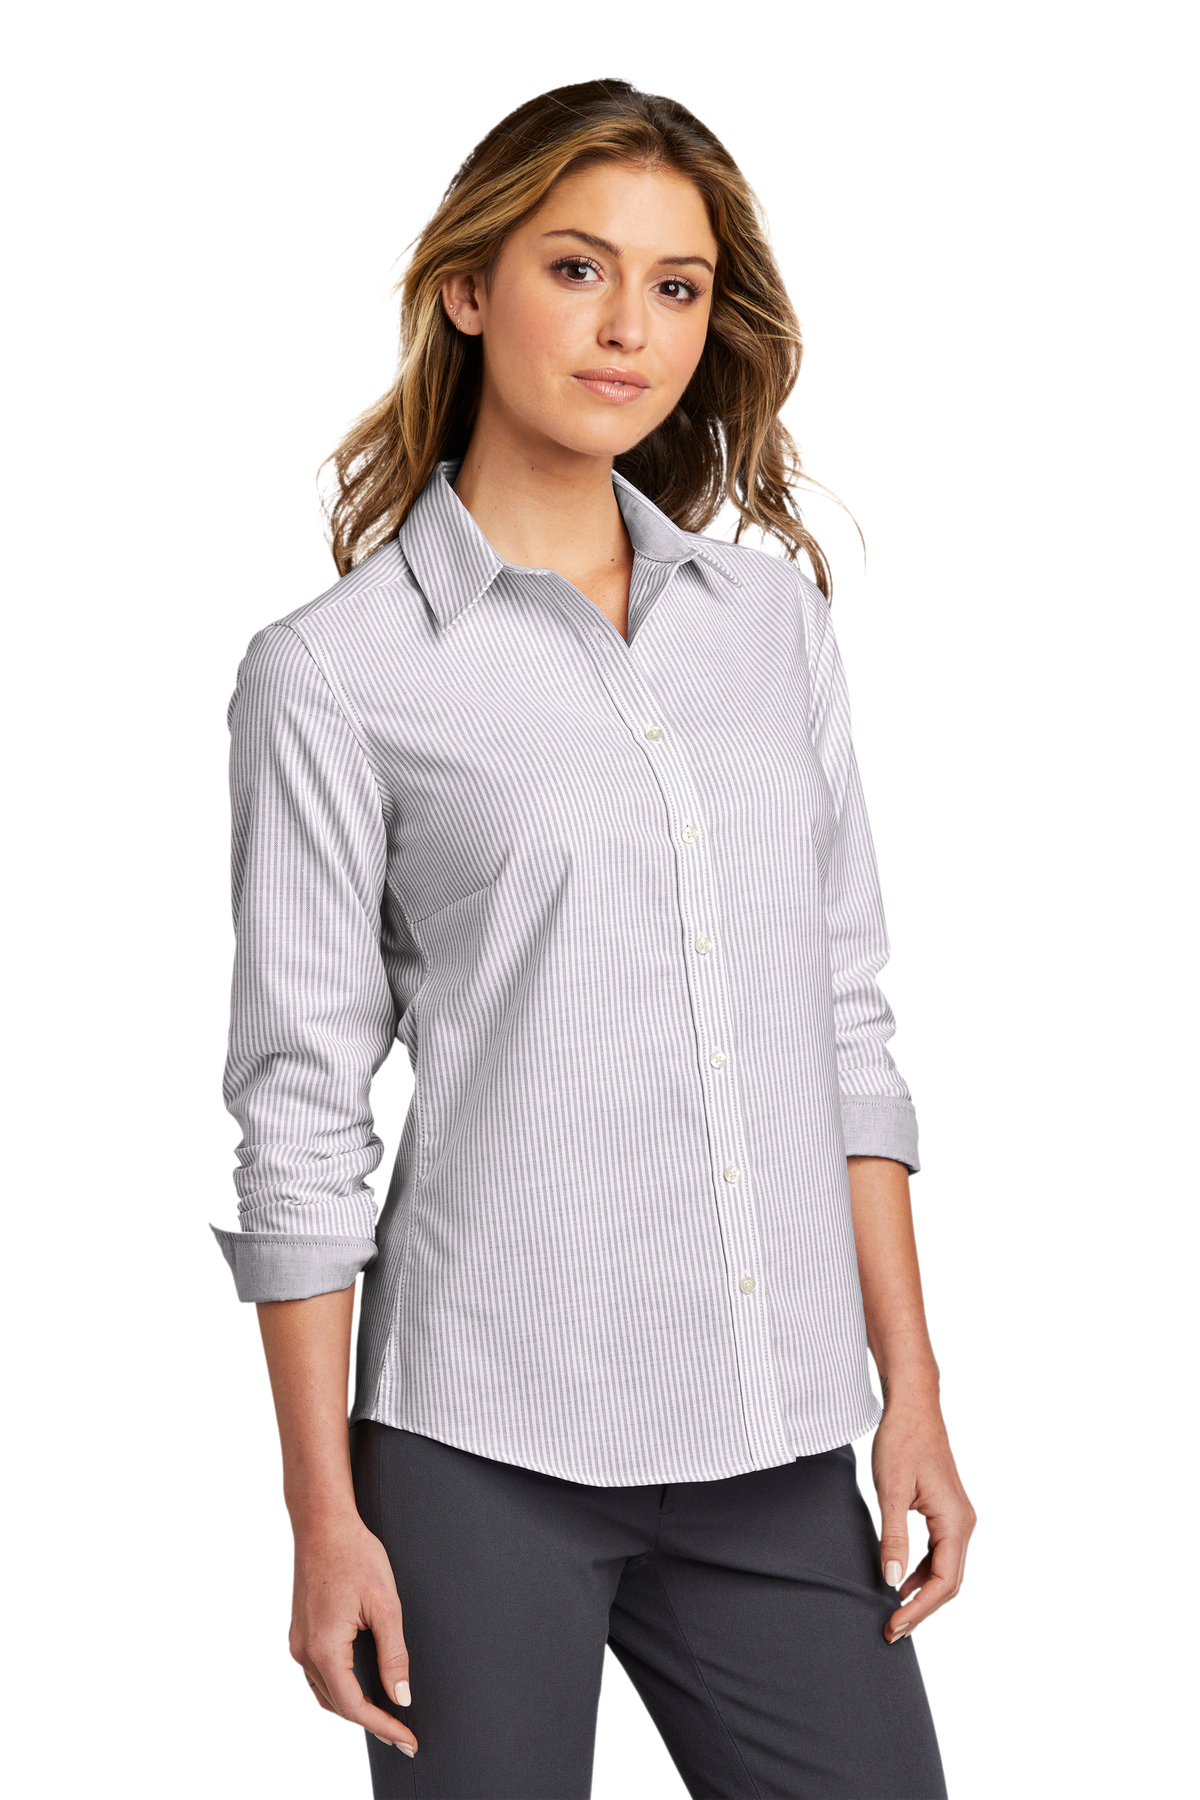 Port Authority Embroidered Women's Oxford SuperPro Stripe Shirt ...